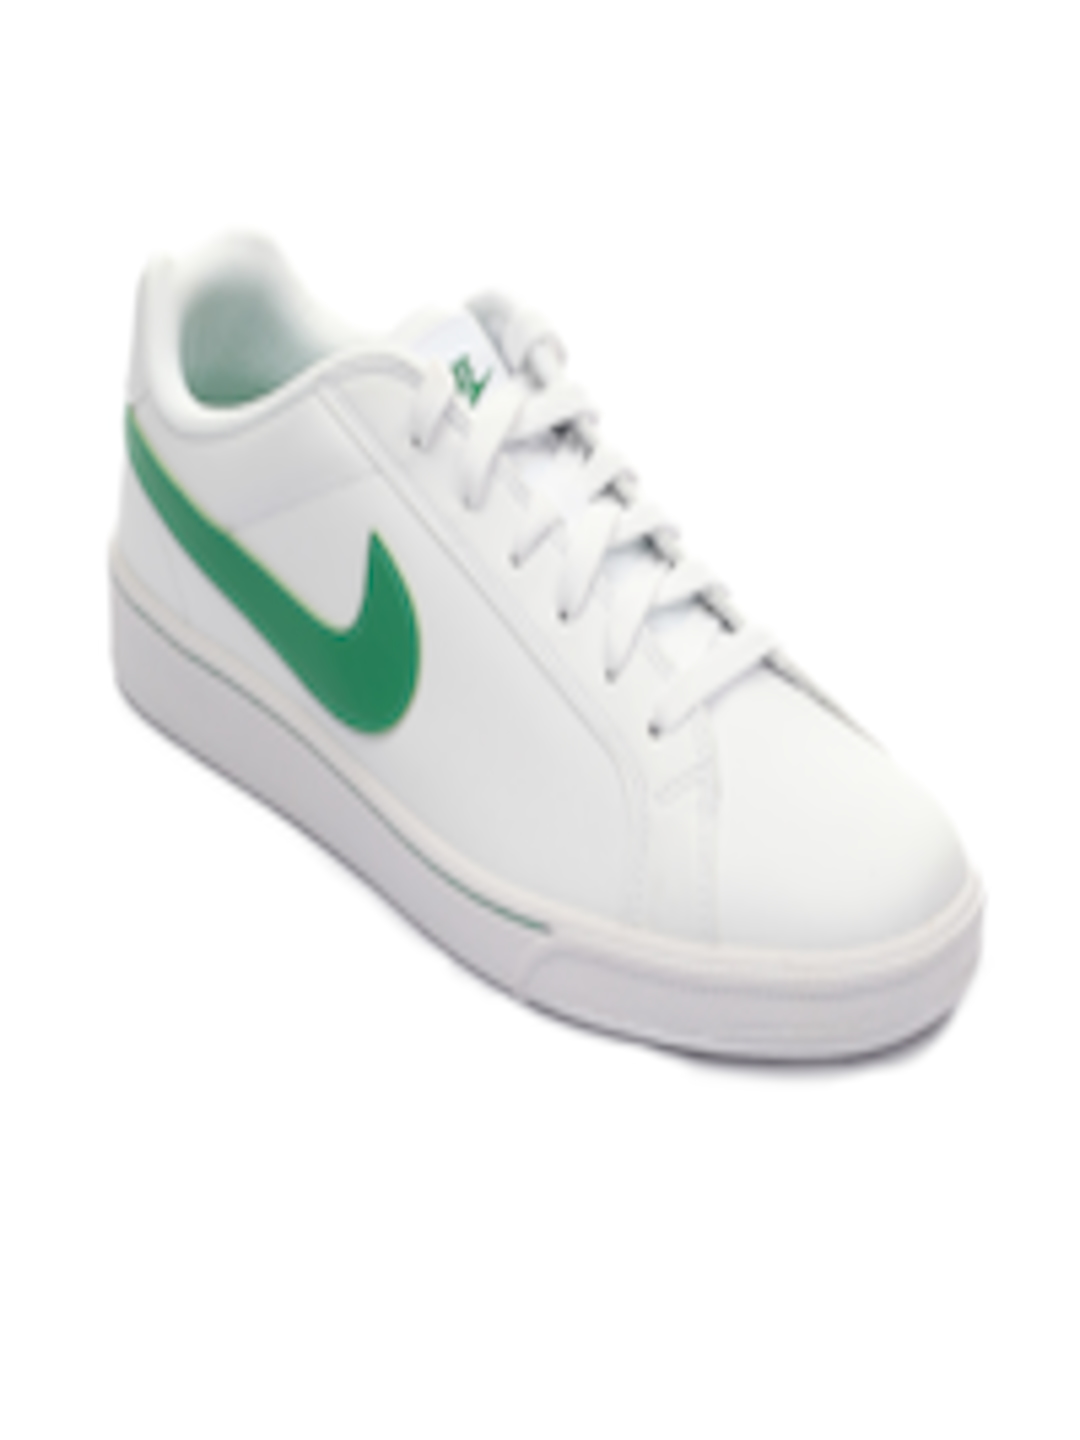 Buy Nike Men Court Majestic White Sports Shoes - Sports Shoes for Men ...